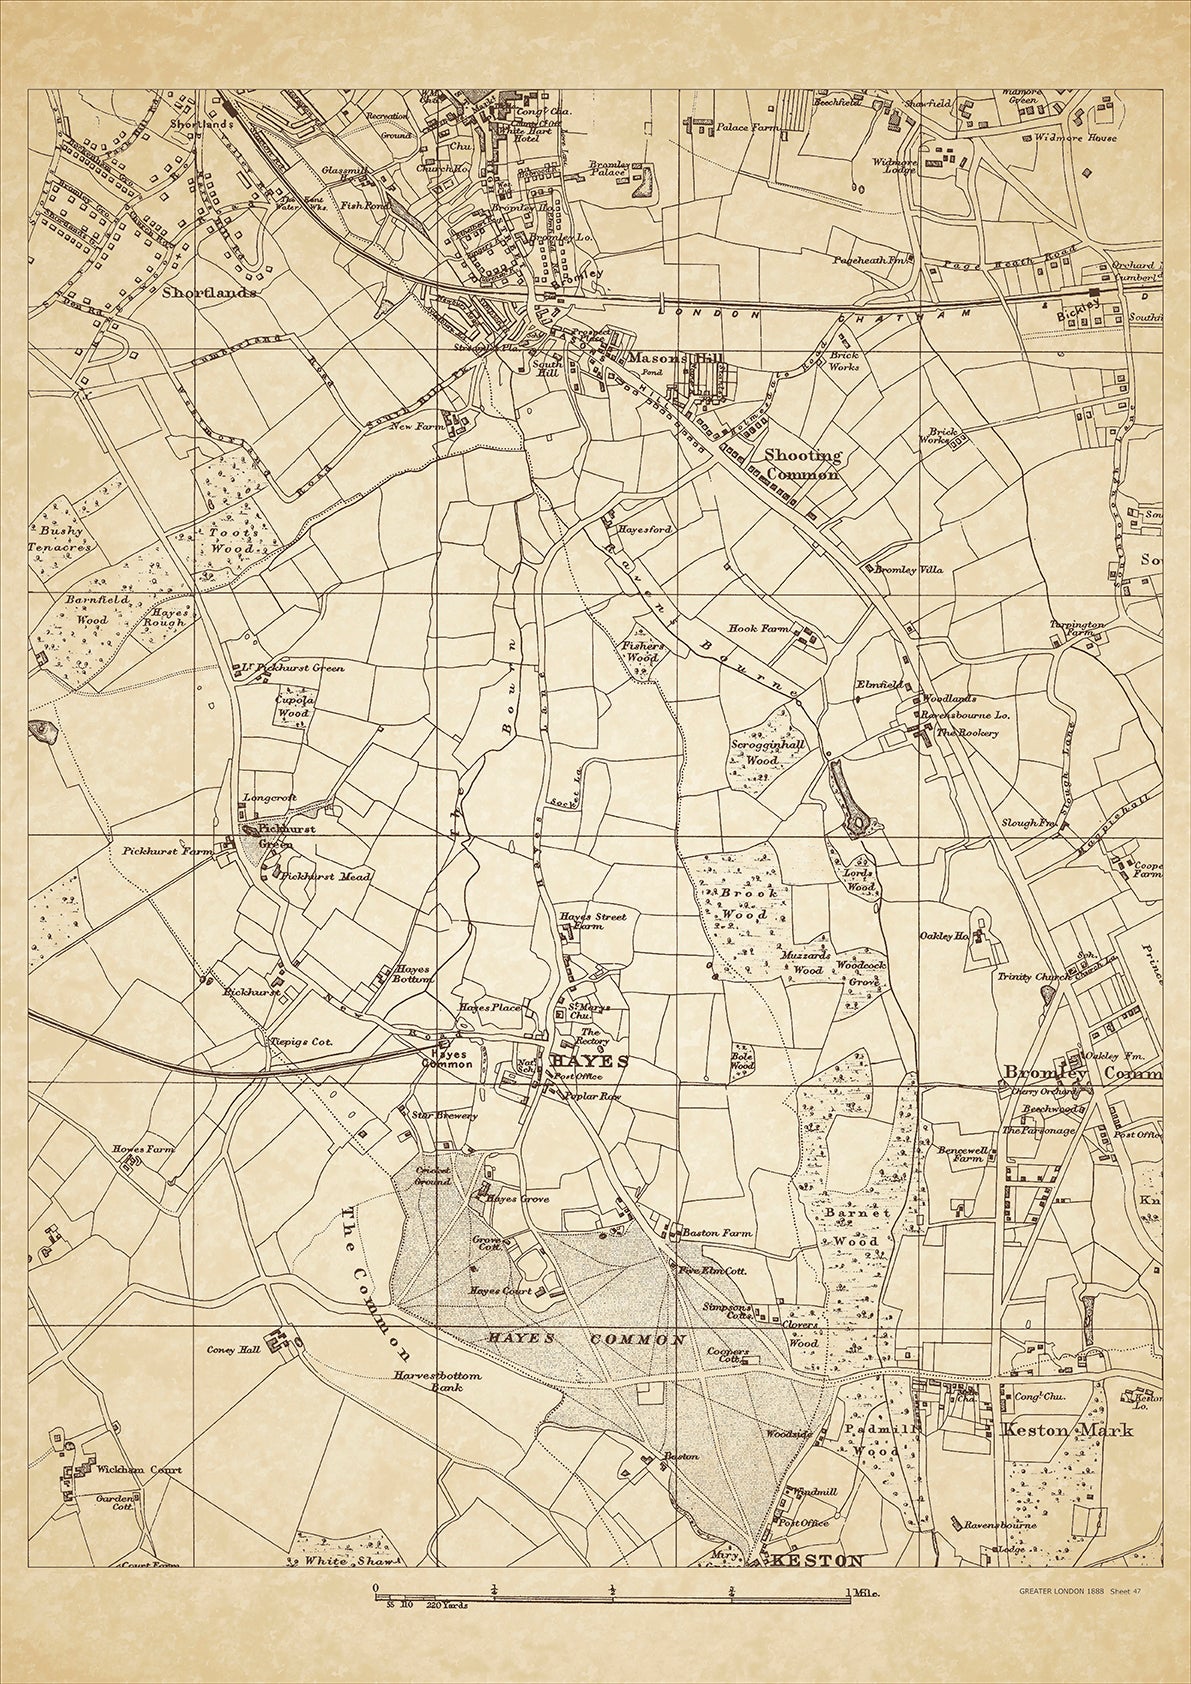 Greater London in 1888 Series - showing Beckenham (south), Hayes, Shooting Common, Masons Hill, Keston (north), Keston Mark, Bromley Common (west) - sheet 47